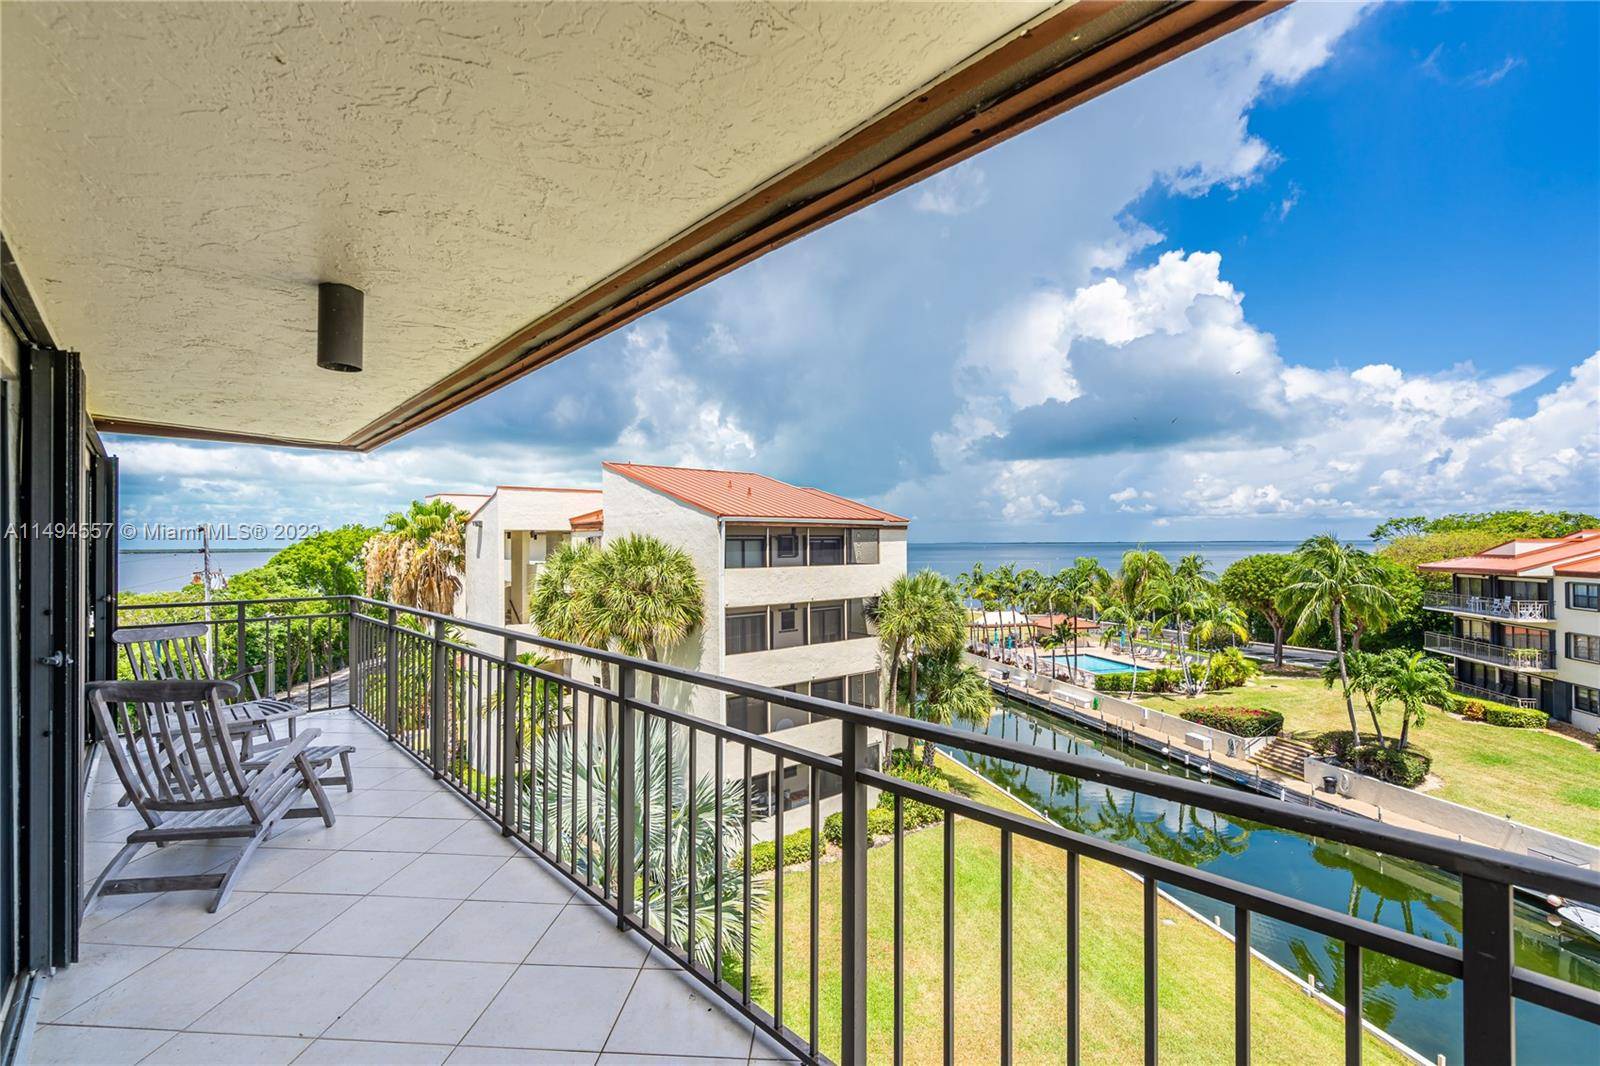 Rarely available, 3 bedroom 2 bath penthouse level condo in sought after Tamarind Bay, Key Largo.